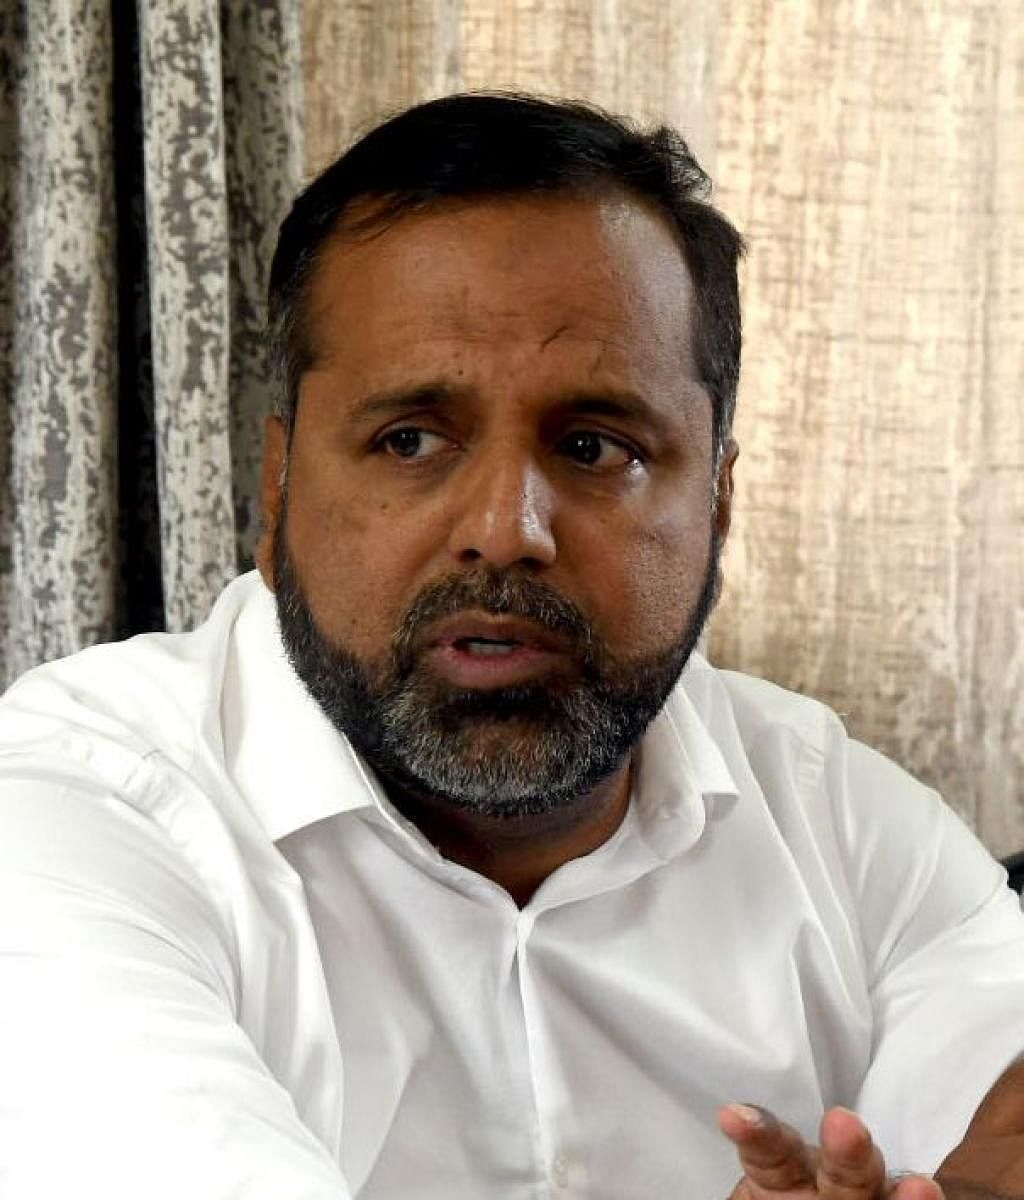 Khader said he lacked faith in the BJP government, citing the case of Pragya Thakur. File photo